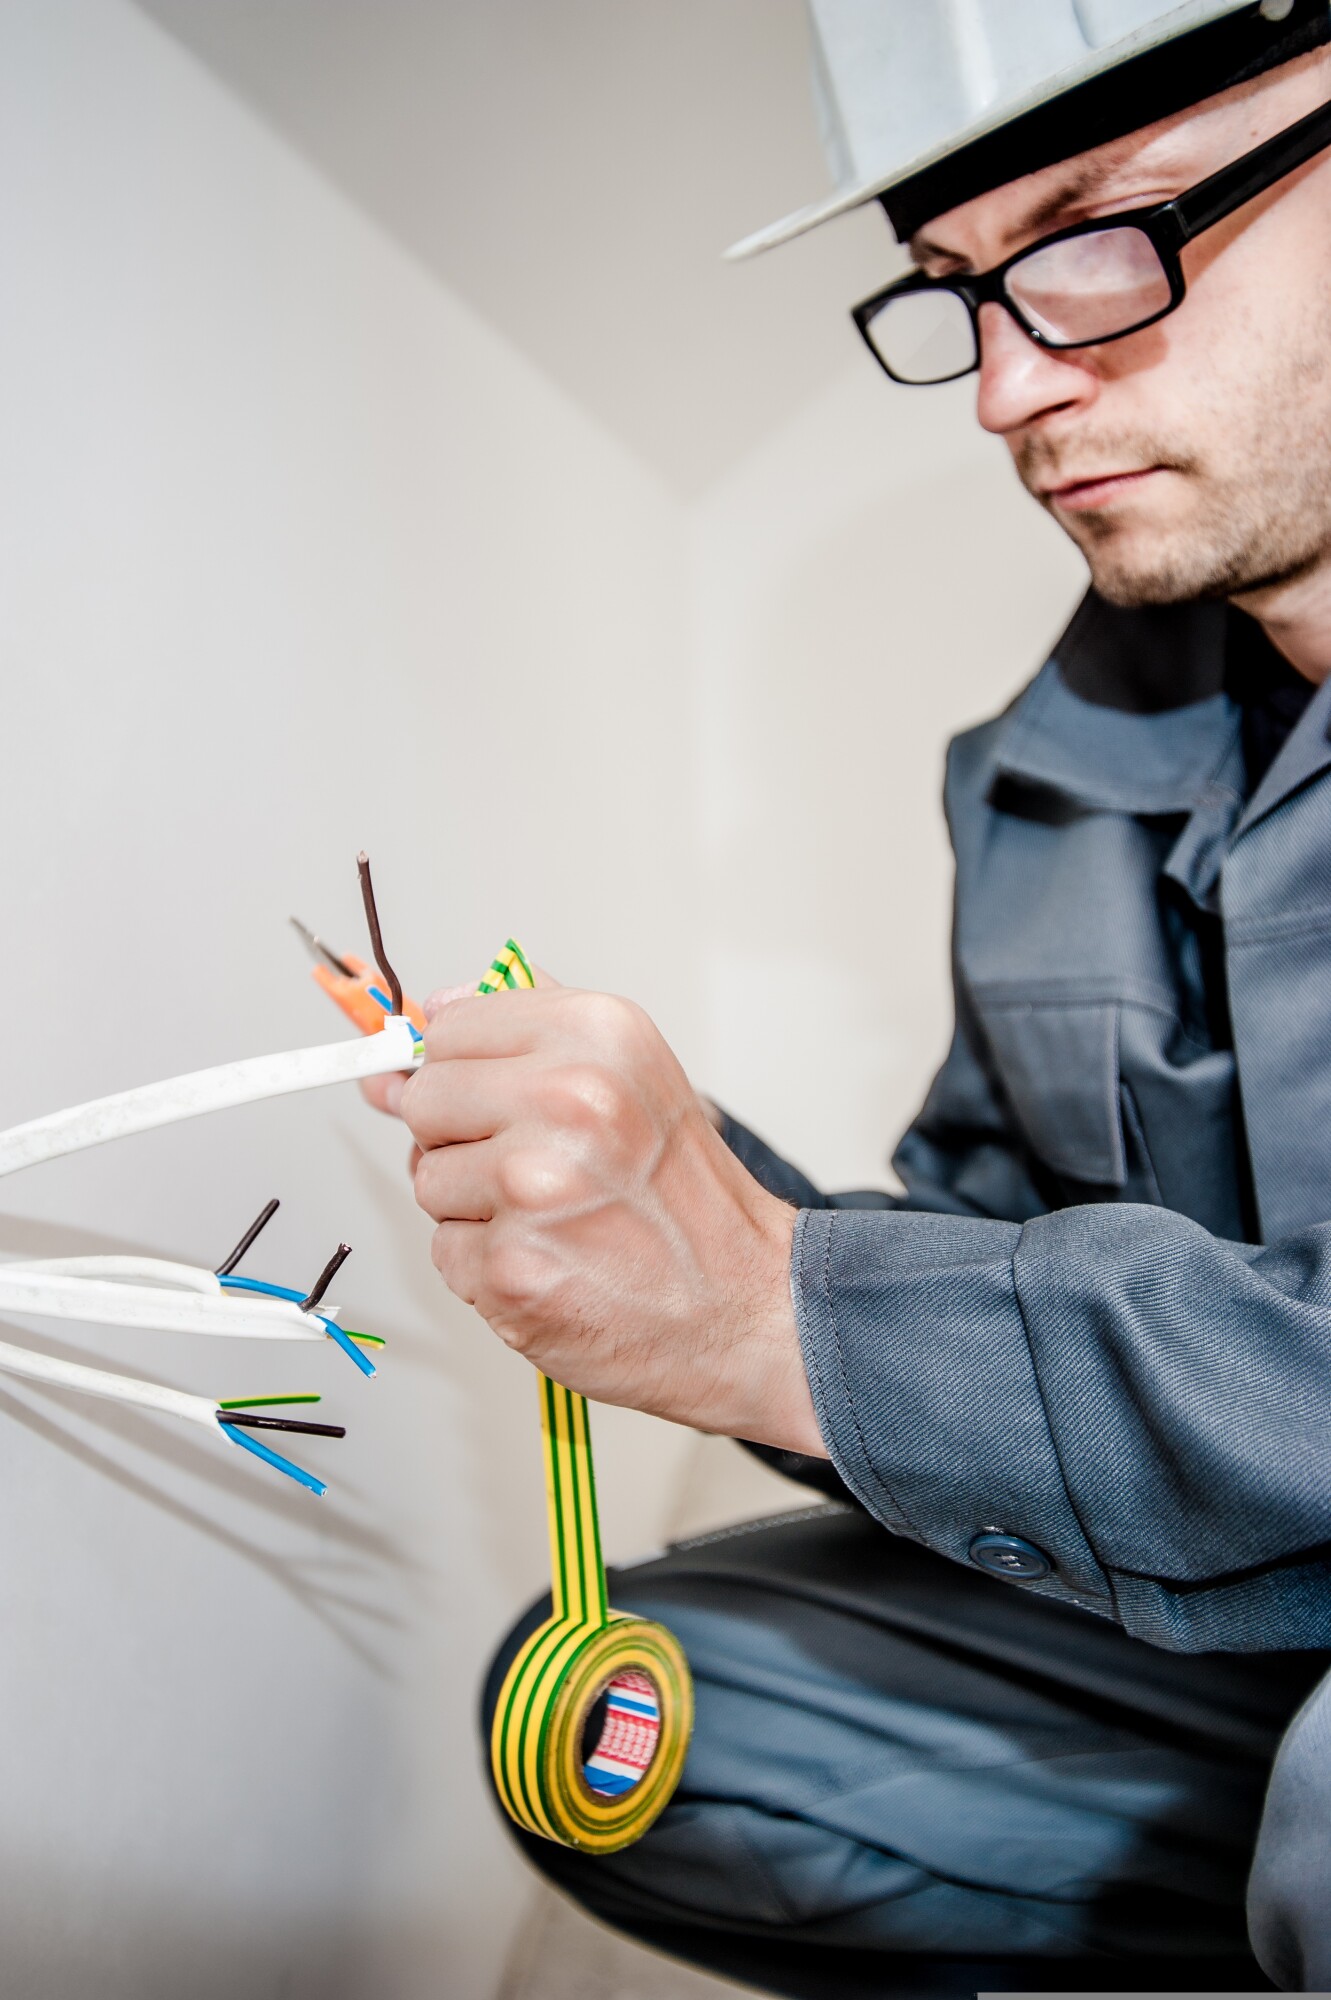 When and Why You Might Need An Emergency Electrician